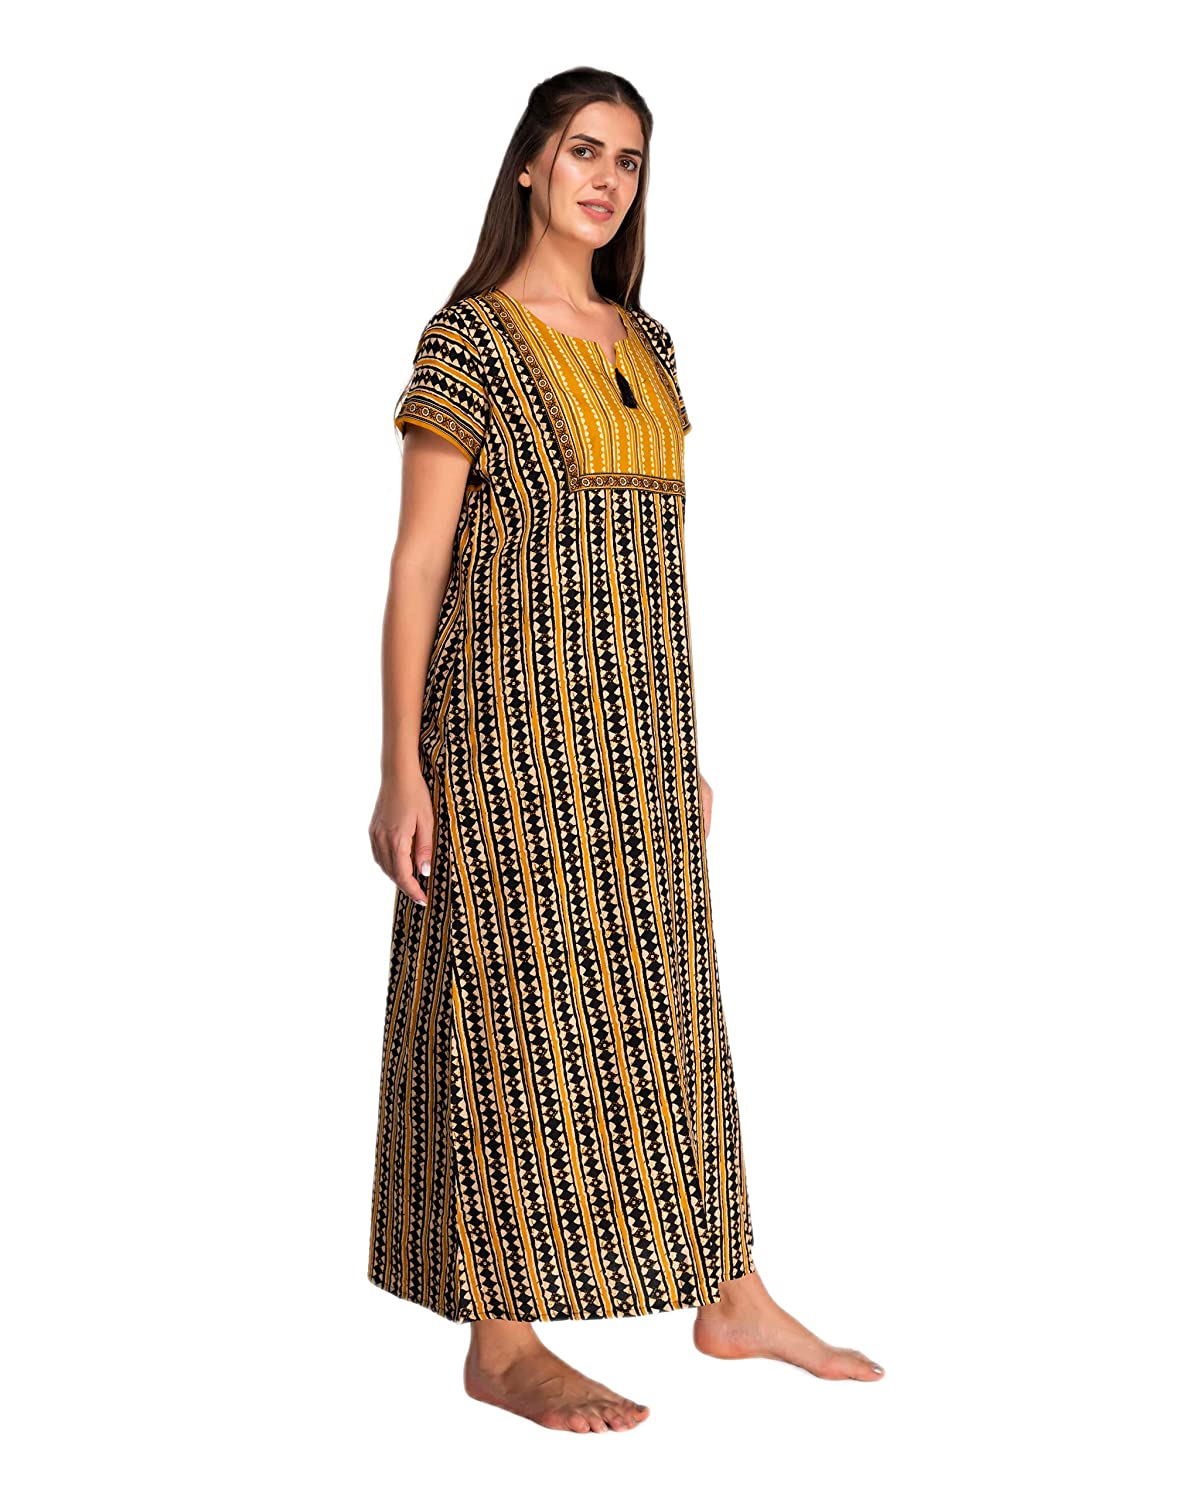 Buy KBNBJ Women's Cotton All Over Printed Ankle Length Night Gown Nighty  (Multicolour, Free Size) - Combo Pack of 4 (B) at Amazon.in